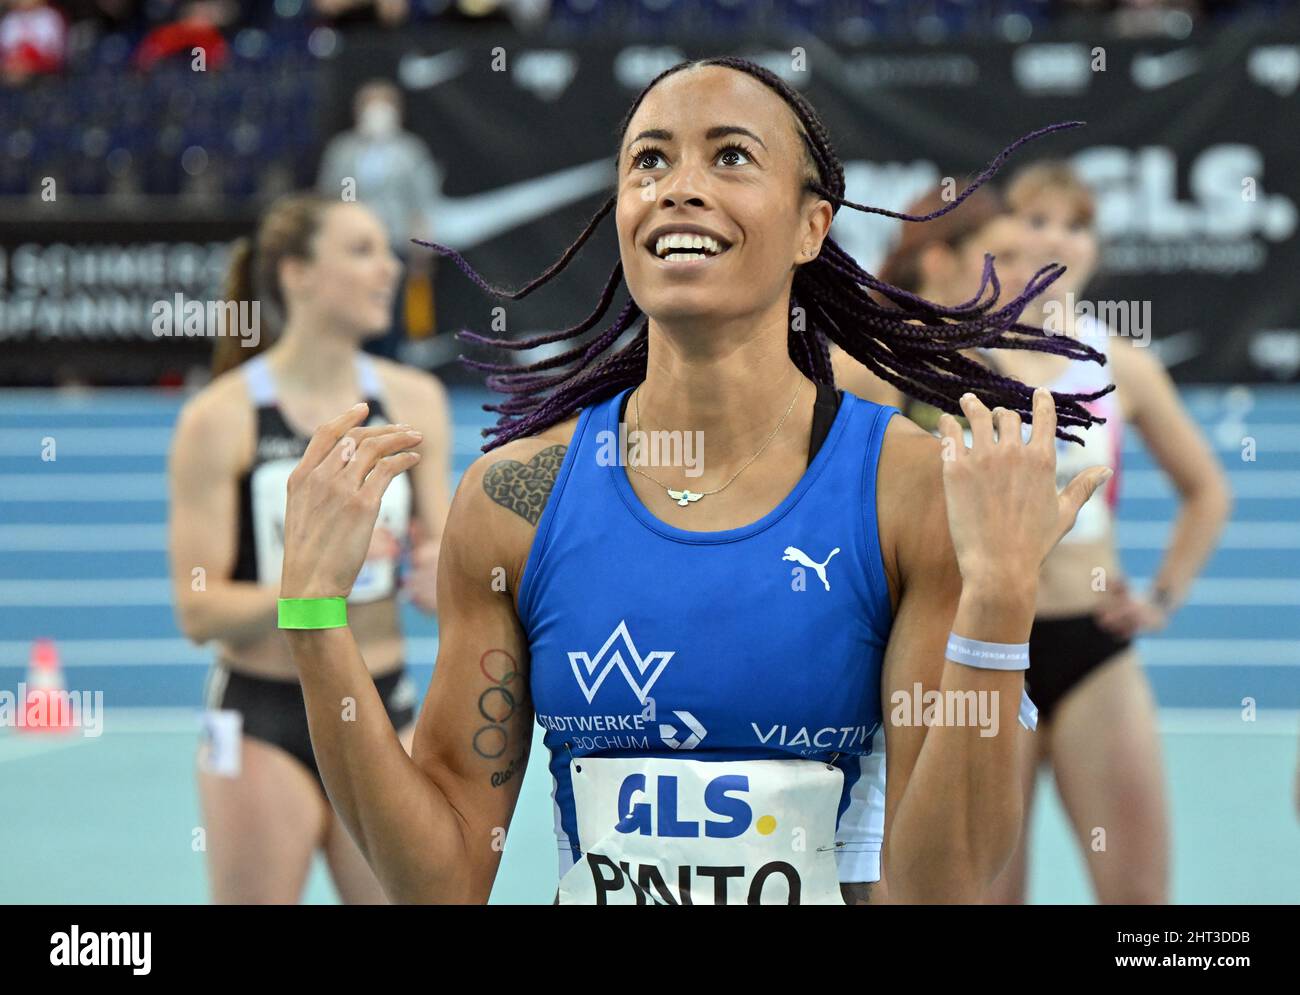 Leipzig, Germany. 26th Feb, 2022. Tatjana Pinto wins the 60-meter race during the German Indoor Athletics Championships at the Arena Leipzig